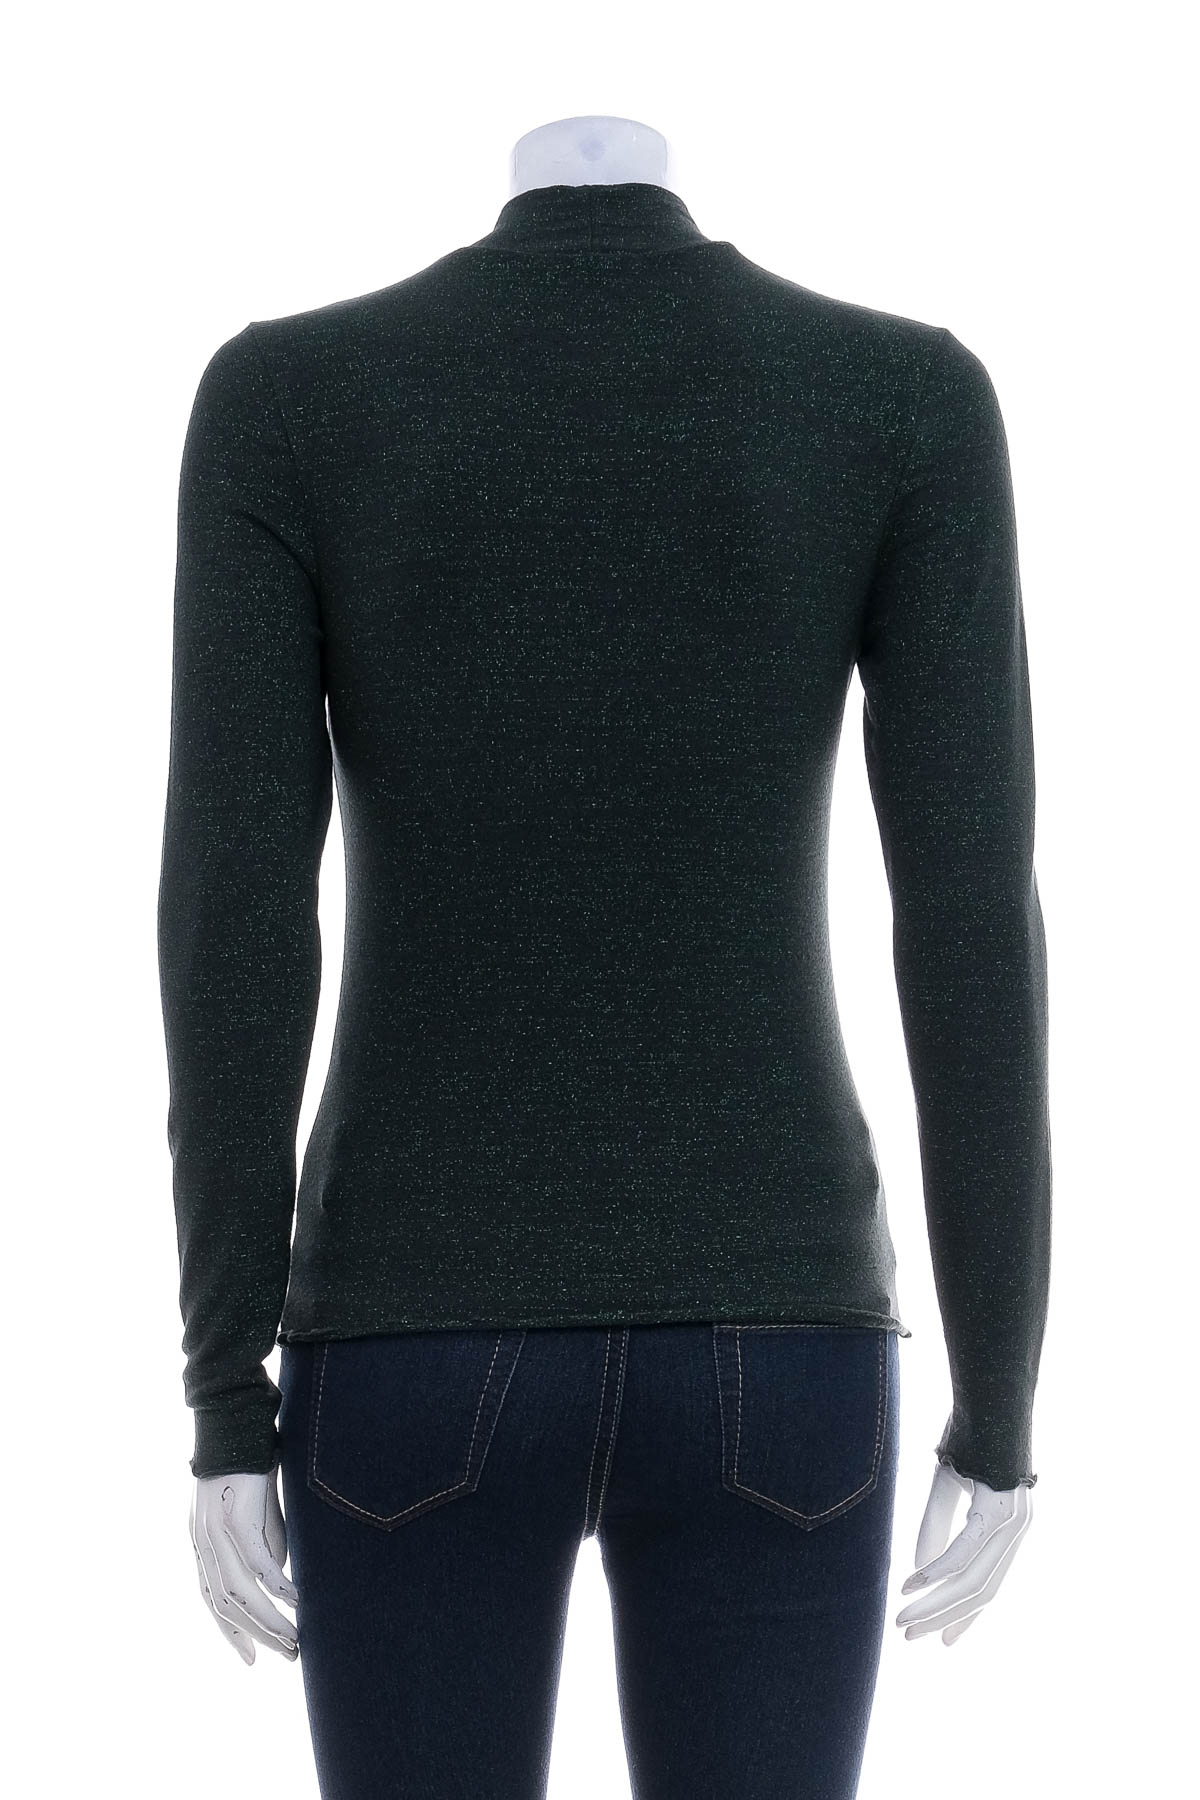 Women's sweater - PIGALLE - 1